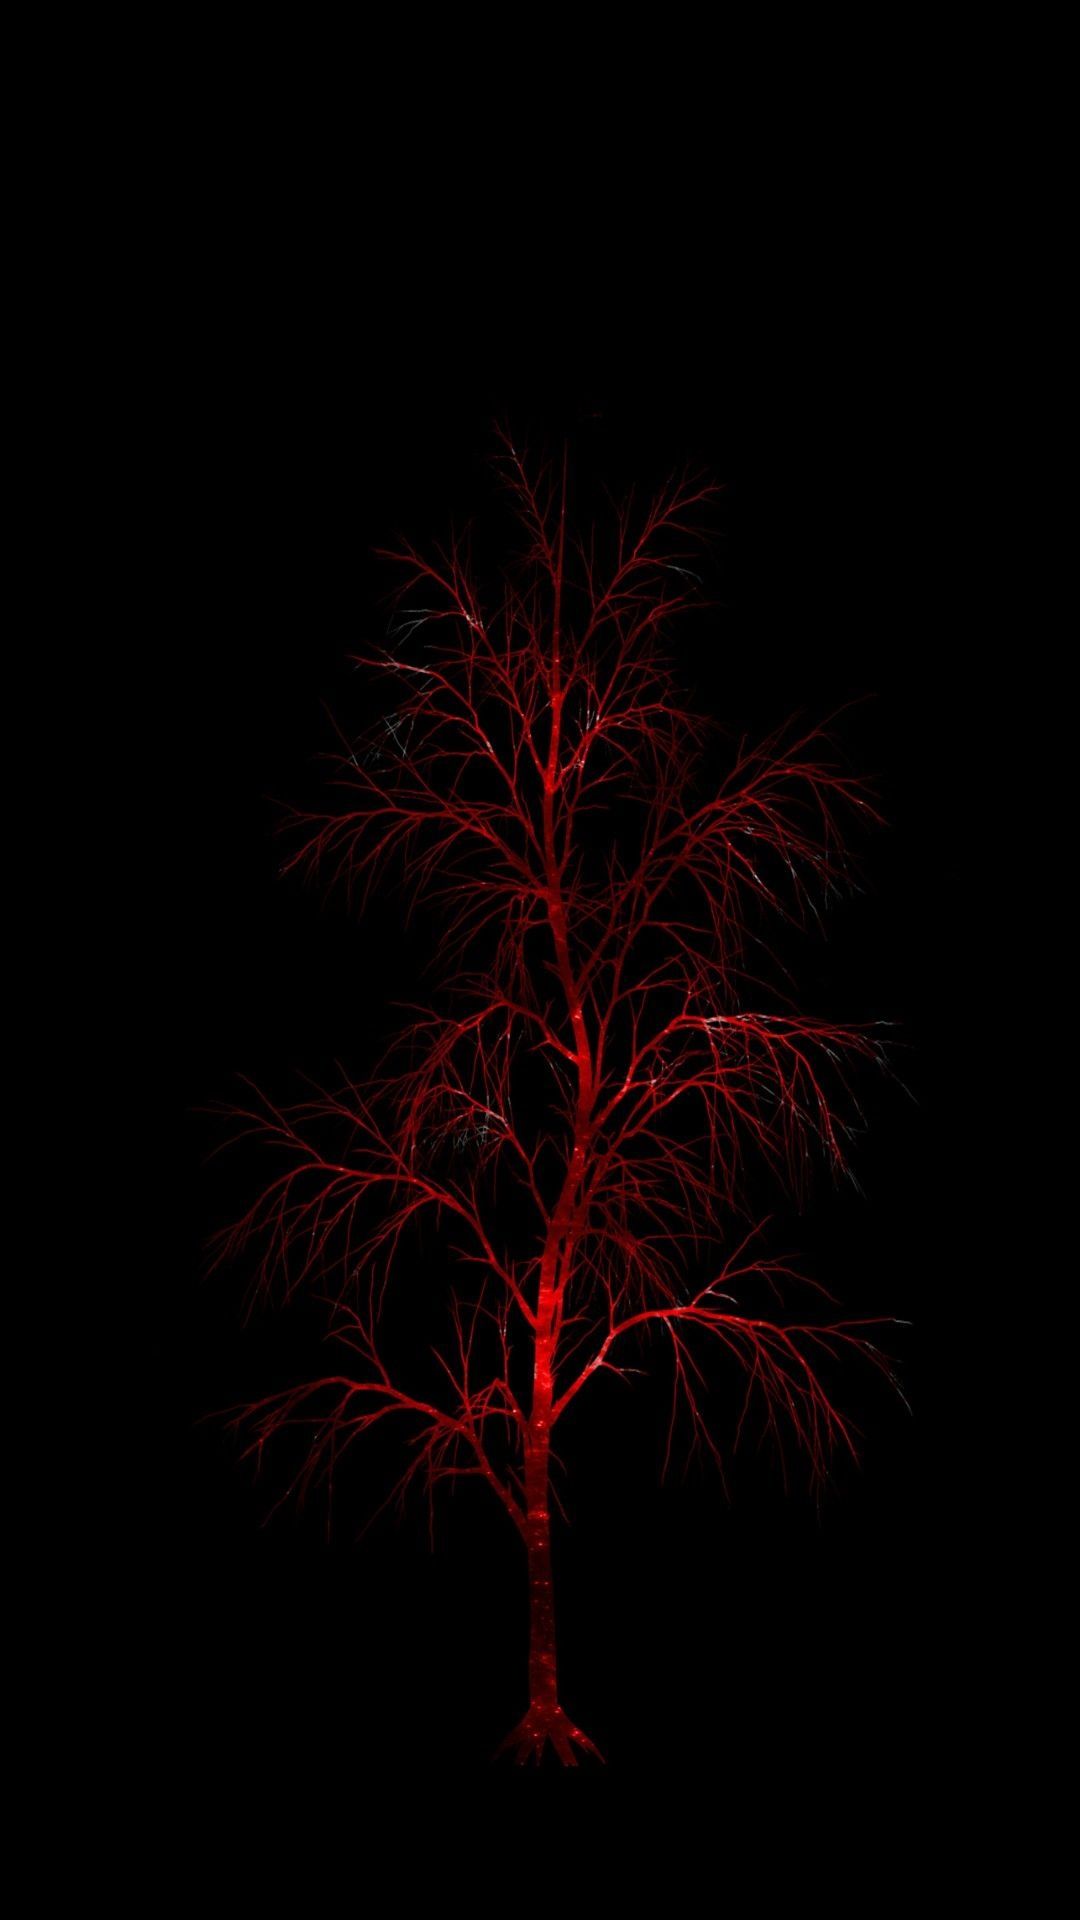 Red tree wallpaper for iPhone with high-resolution 1080x1920 pixel. You can use this wallpaper for your iPhone 5, 6, 7, 8, X, XS, XR backgrounds, Mobile Screensaver, or iPad Lock Screen - Dark red, blood